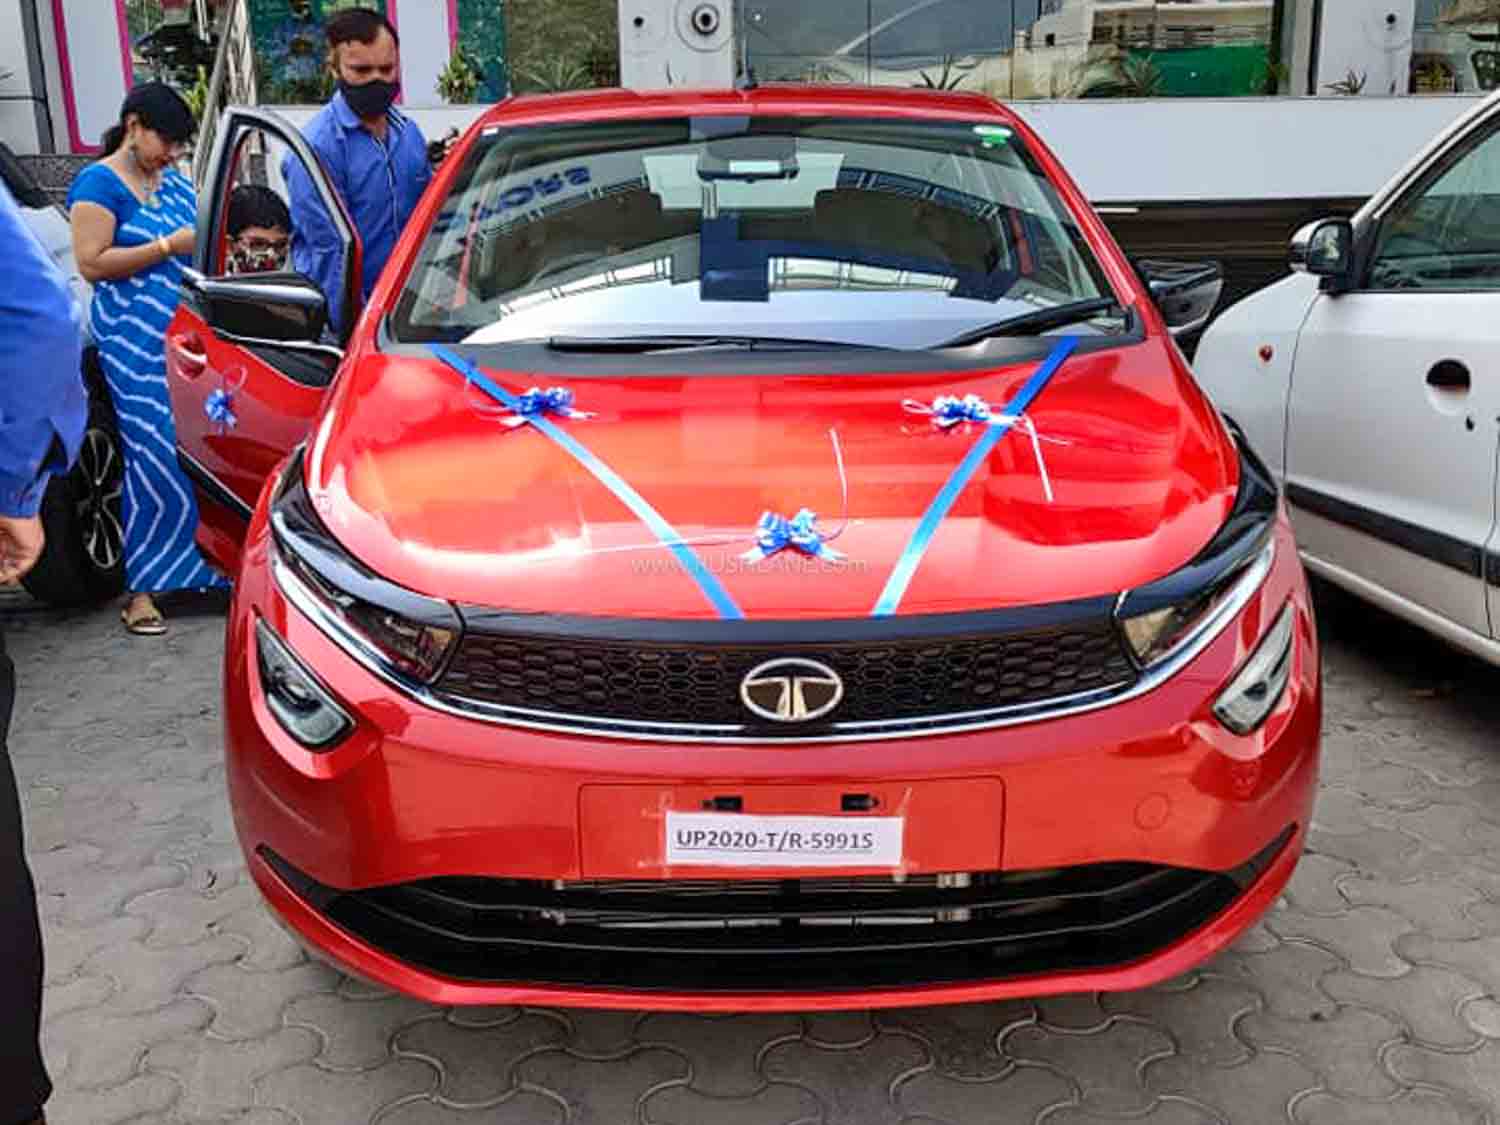 Tata Altroz Xm Variant Launch Price Rs 6 6 Lakhs Rs 30k More Than Xm